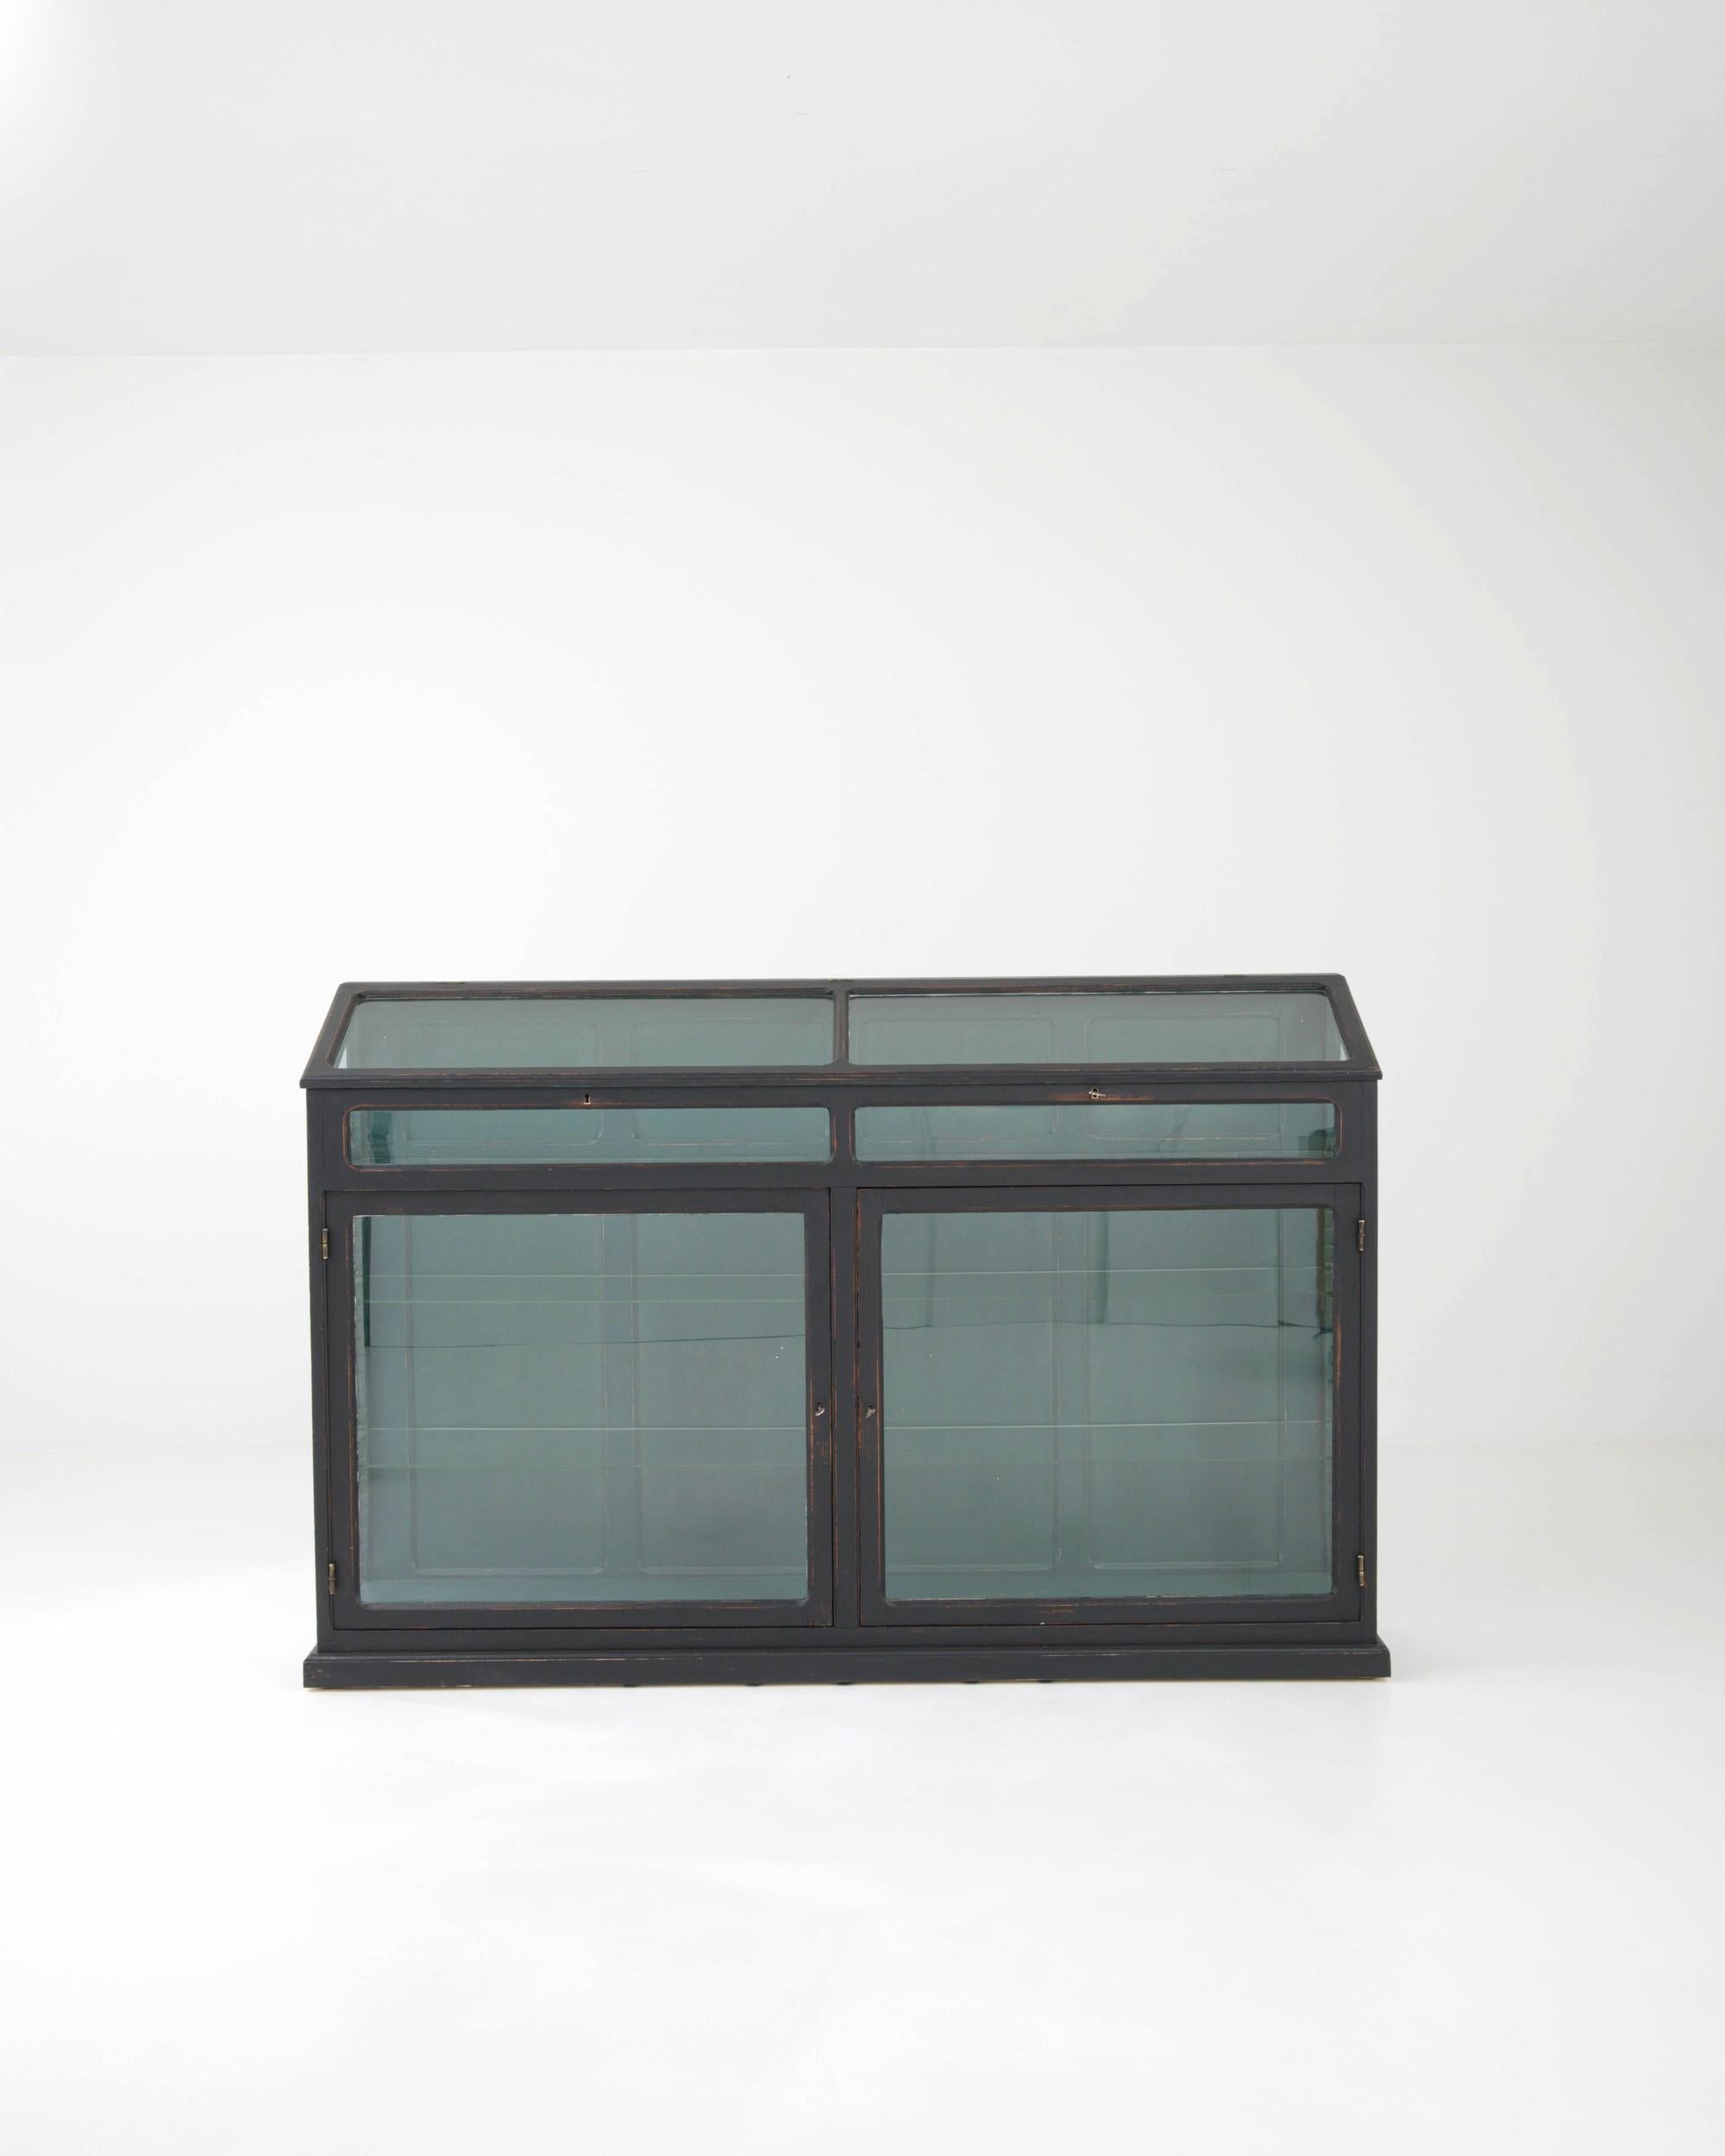 Clean lines and a distinctive color palette give this vintage wooden vitrine an air of timeless sophistication. Built in France in the 1920s, the broad proportions and beautiful craftsmanship of the case suggest that this piece would have originally